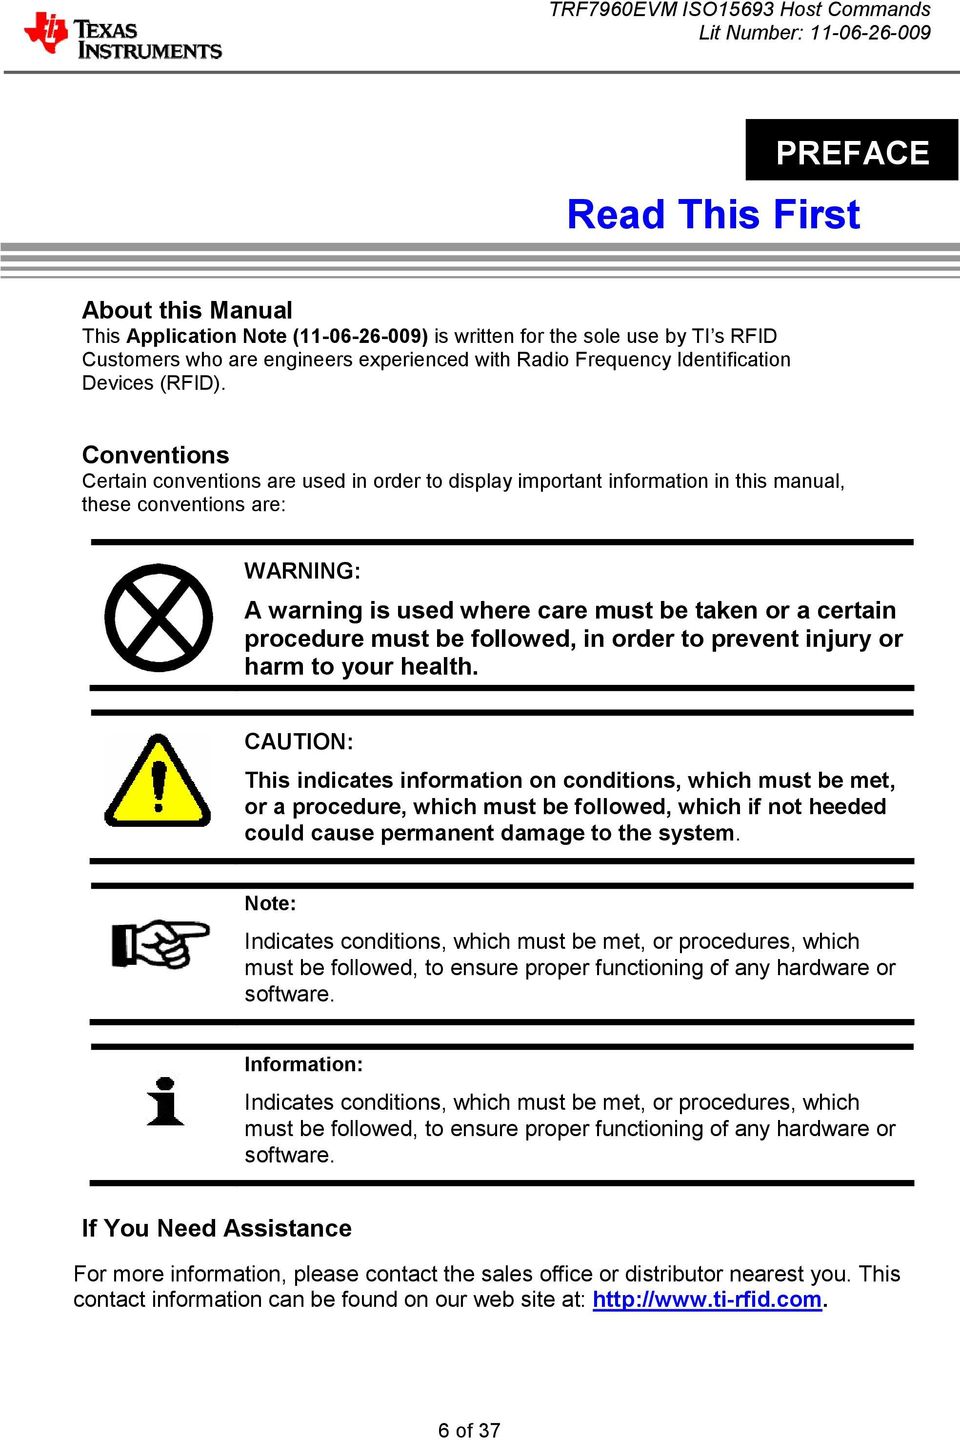 Conventions Certain conventions are used in order to display important information in this manual, these conventions are: WARNING: A warning is used where care must be taken or a certain procedure